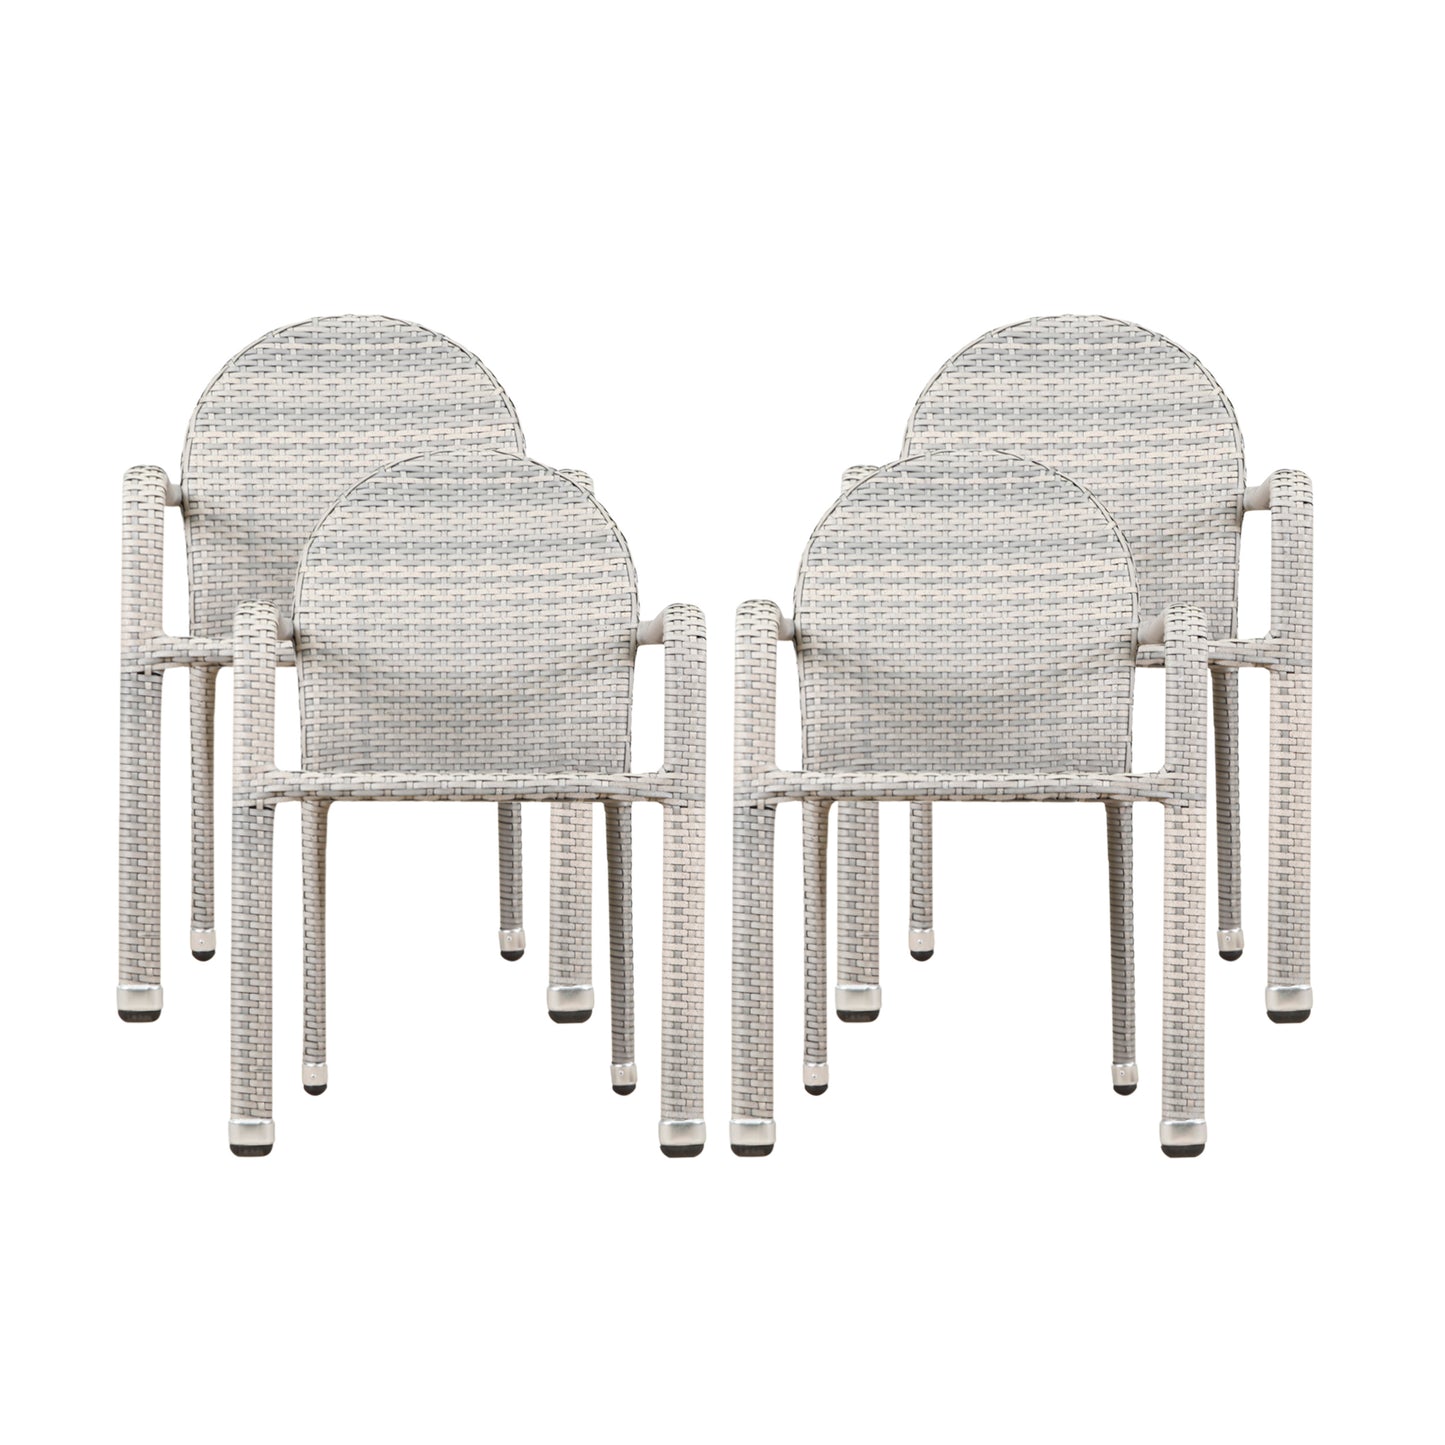 Ava Outdoor Wicker Armed Stack Chairs With Aluminum Frame (Set of 4)